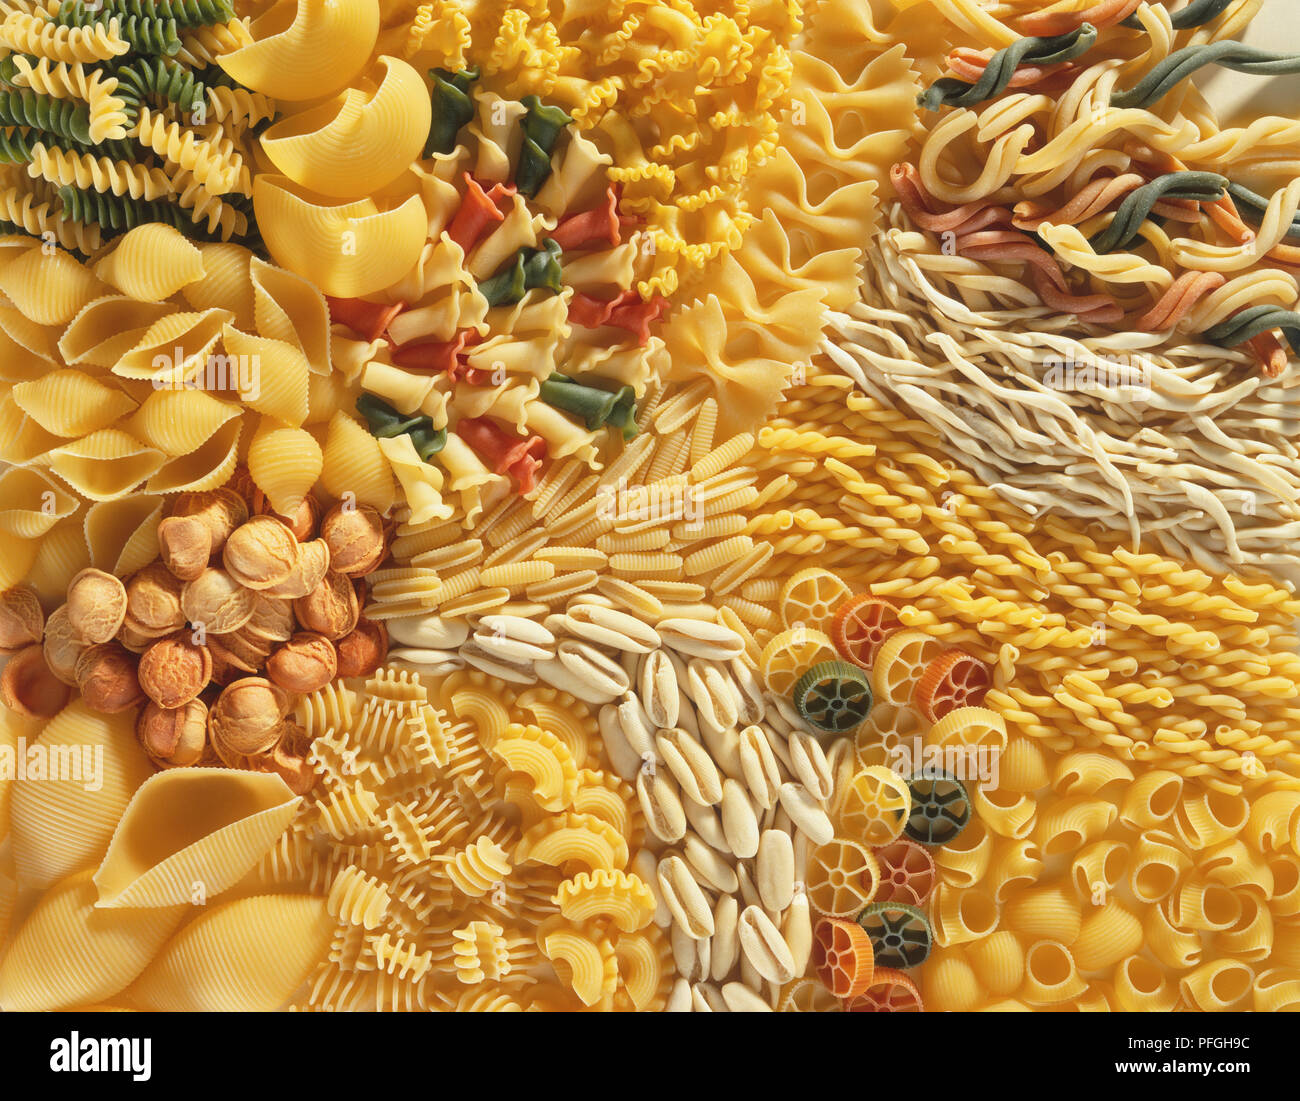 Selection of pasta shapes Stock Photo